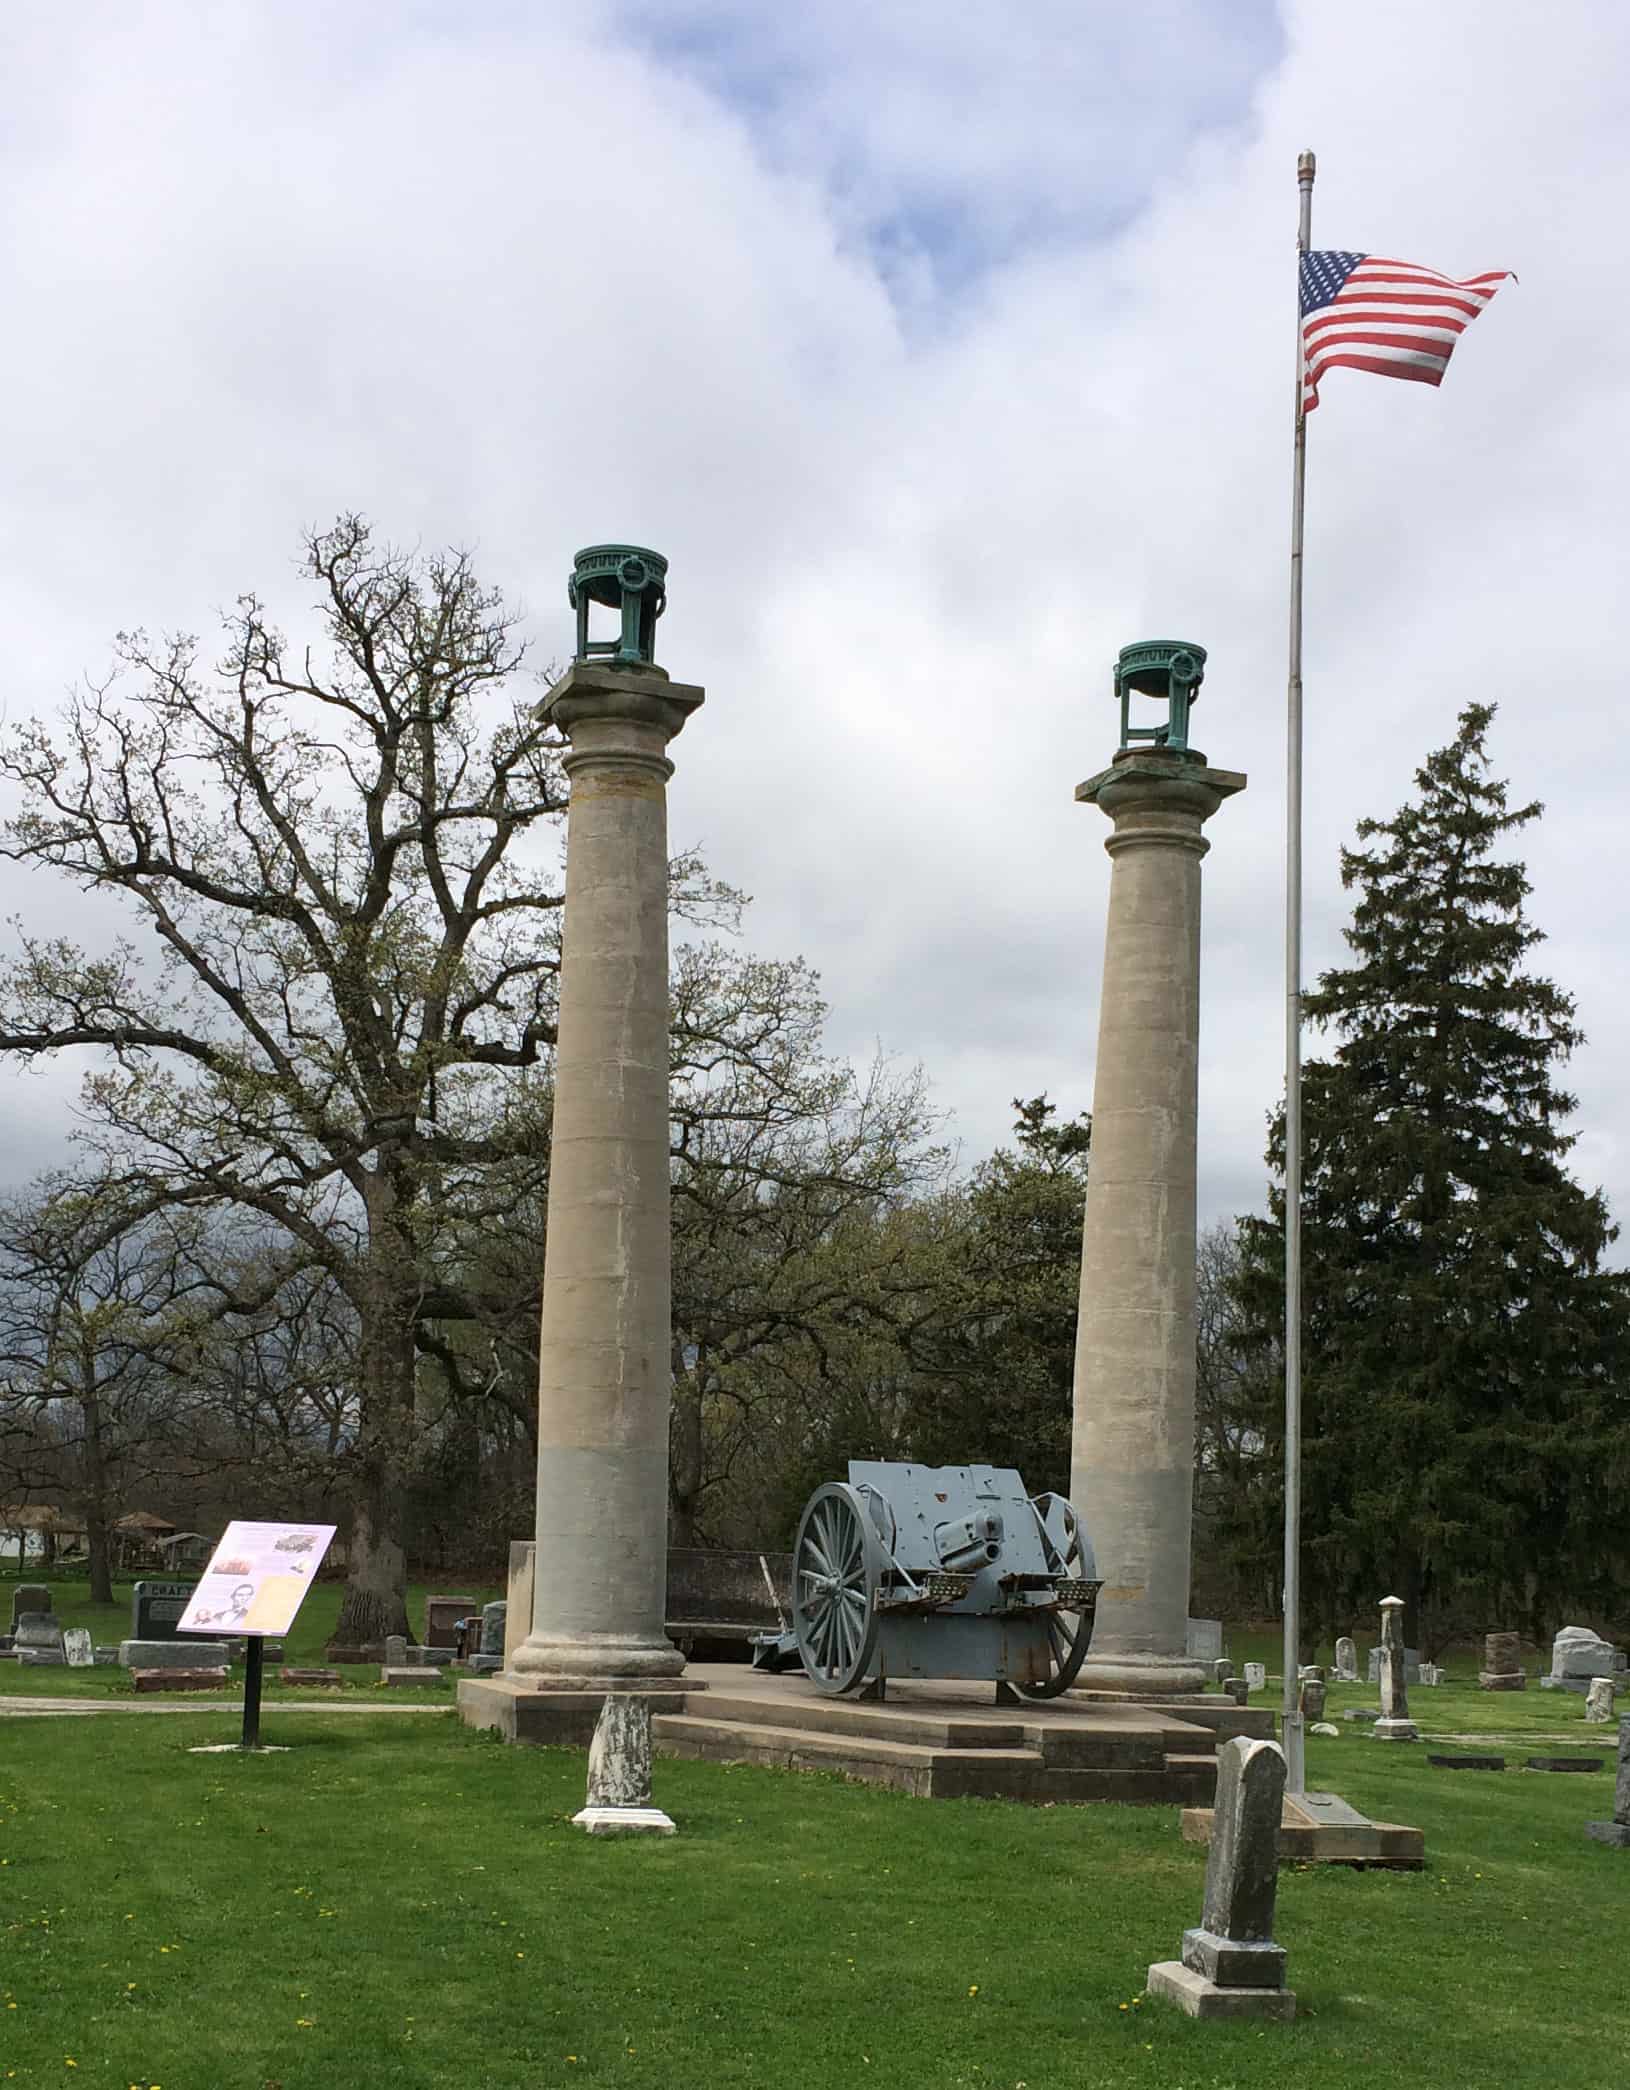 Courthouse columns at Oak Hill Cemetery by Kenrossalex